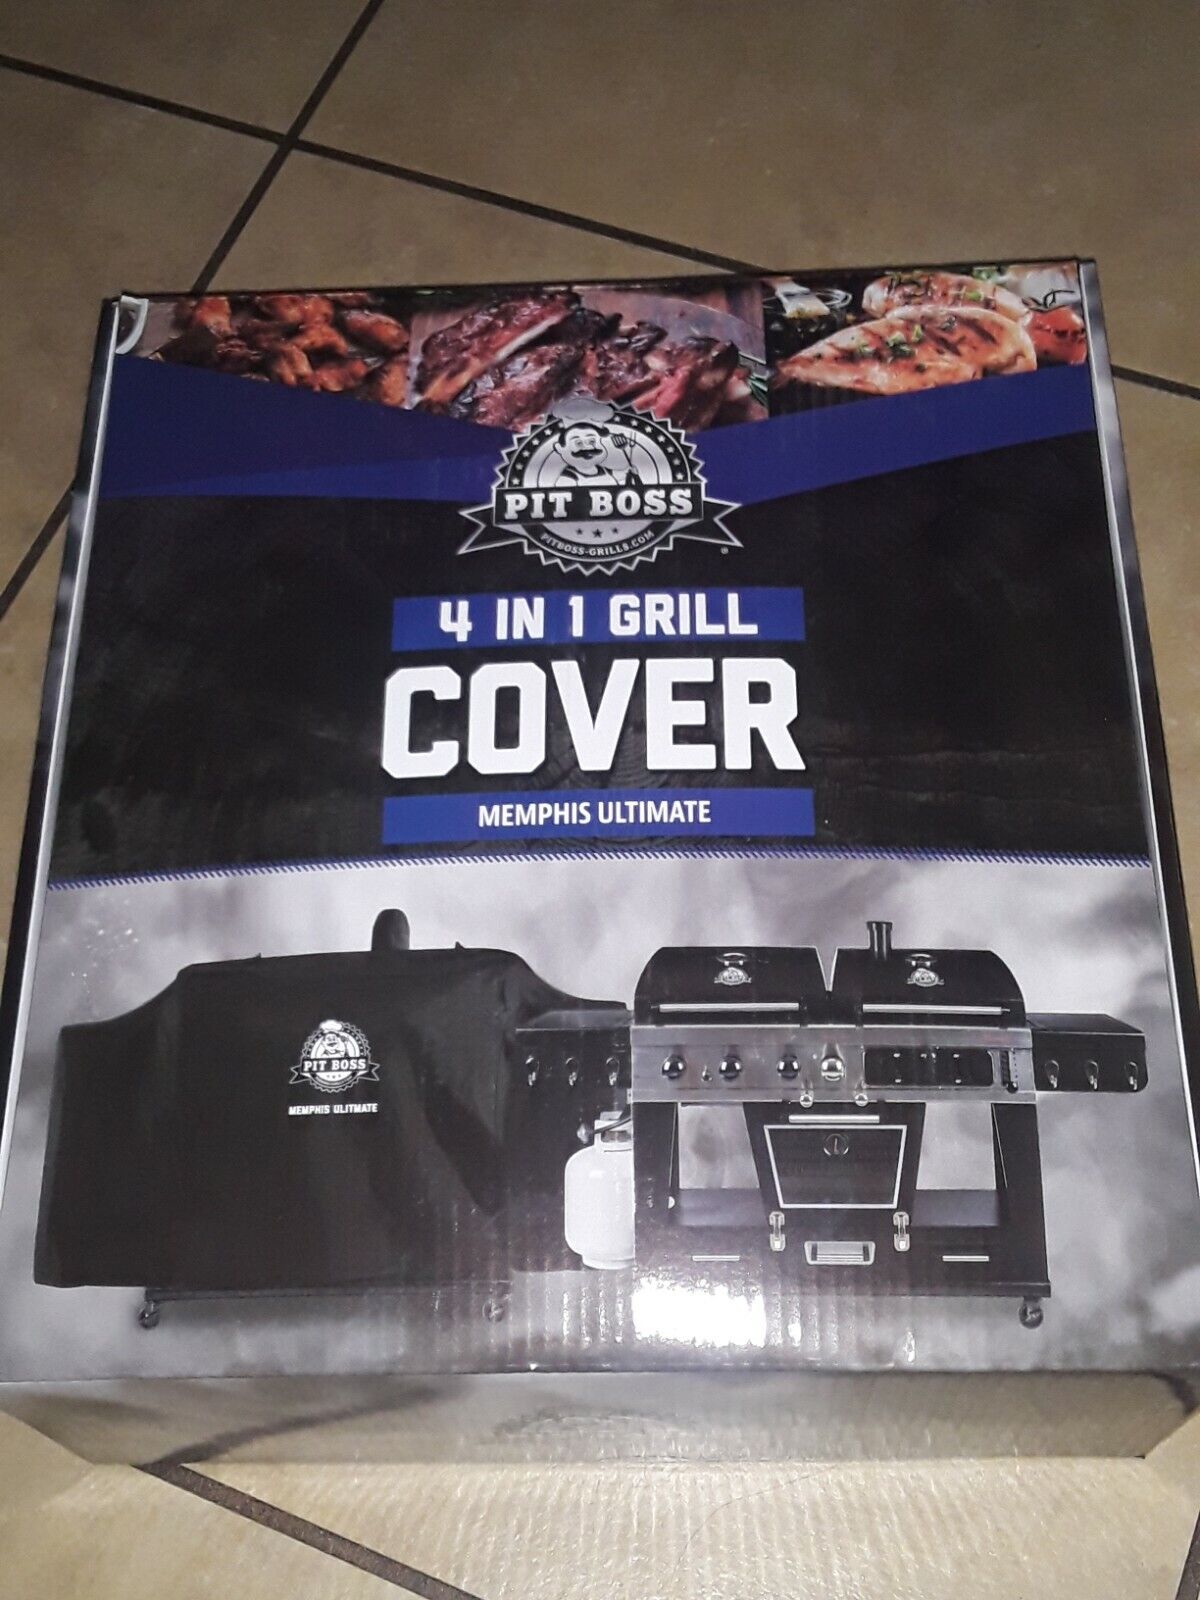 pit boss memphis 4 in 1 grill cover